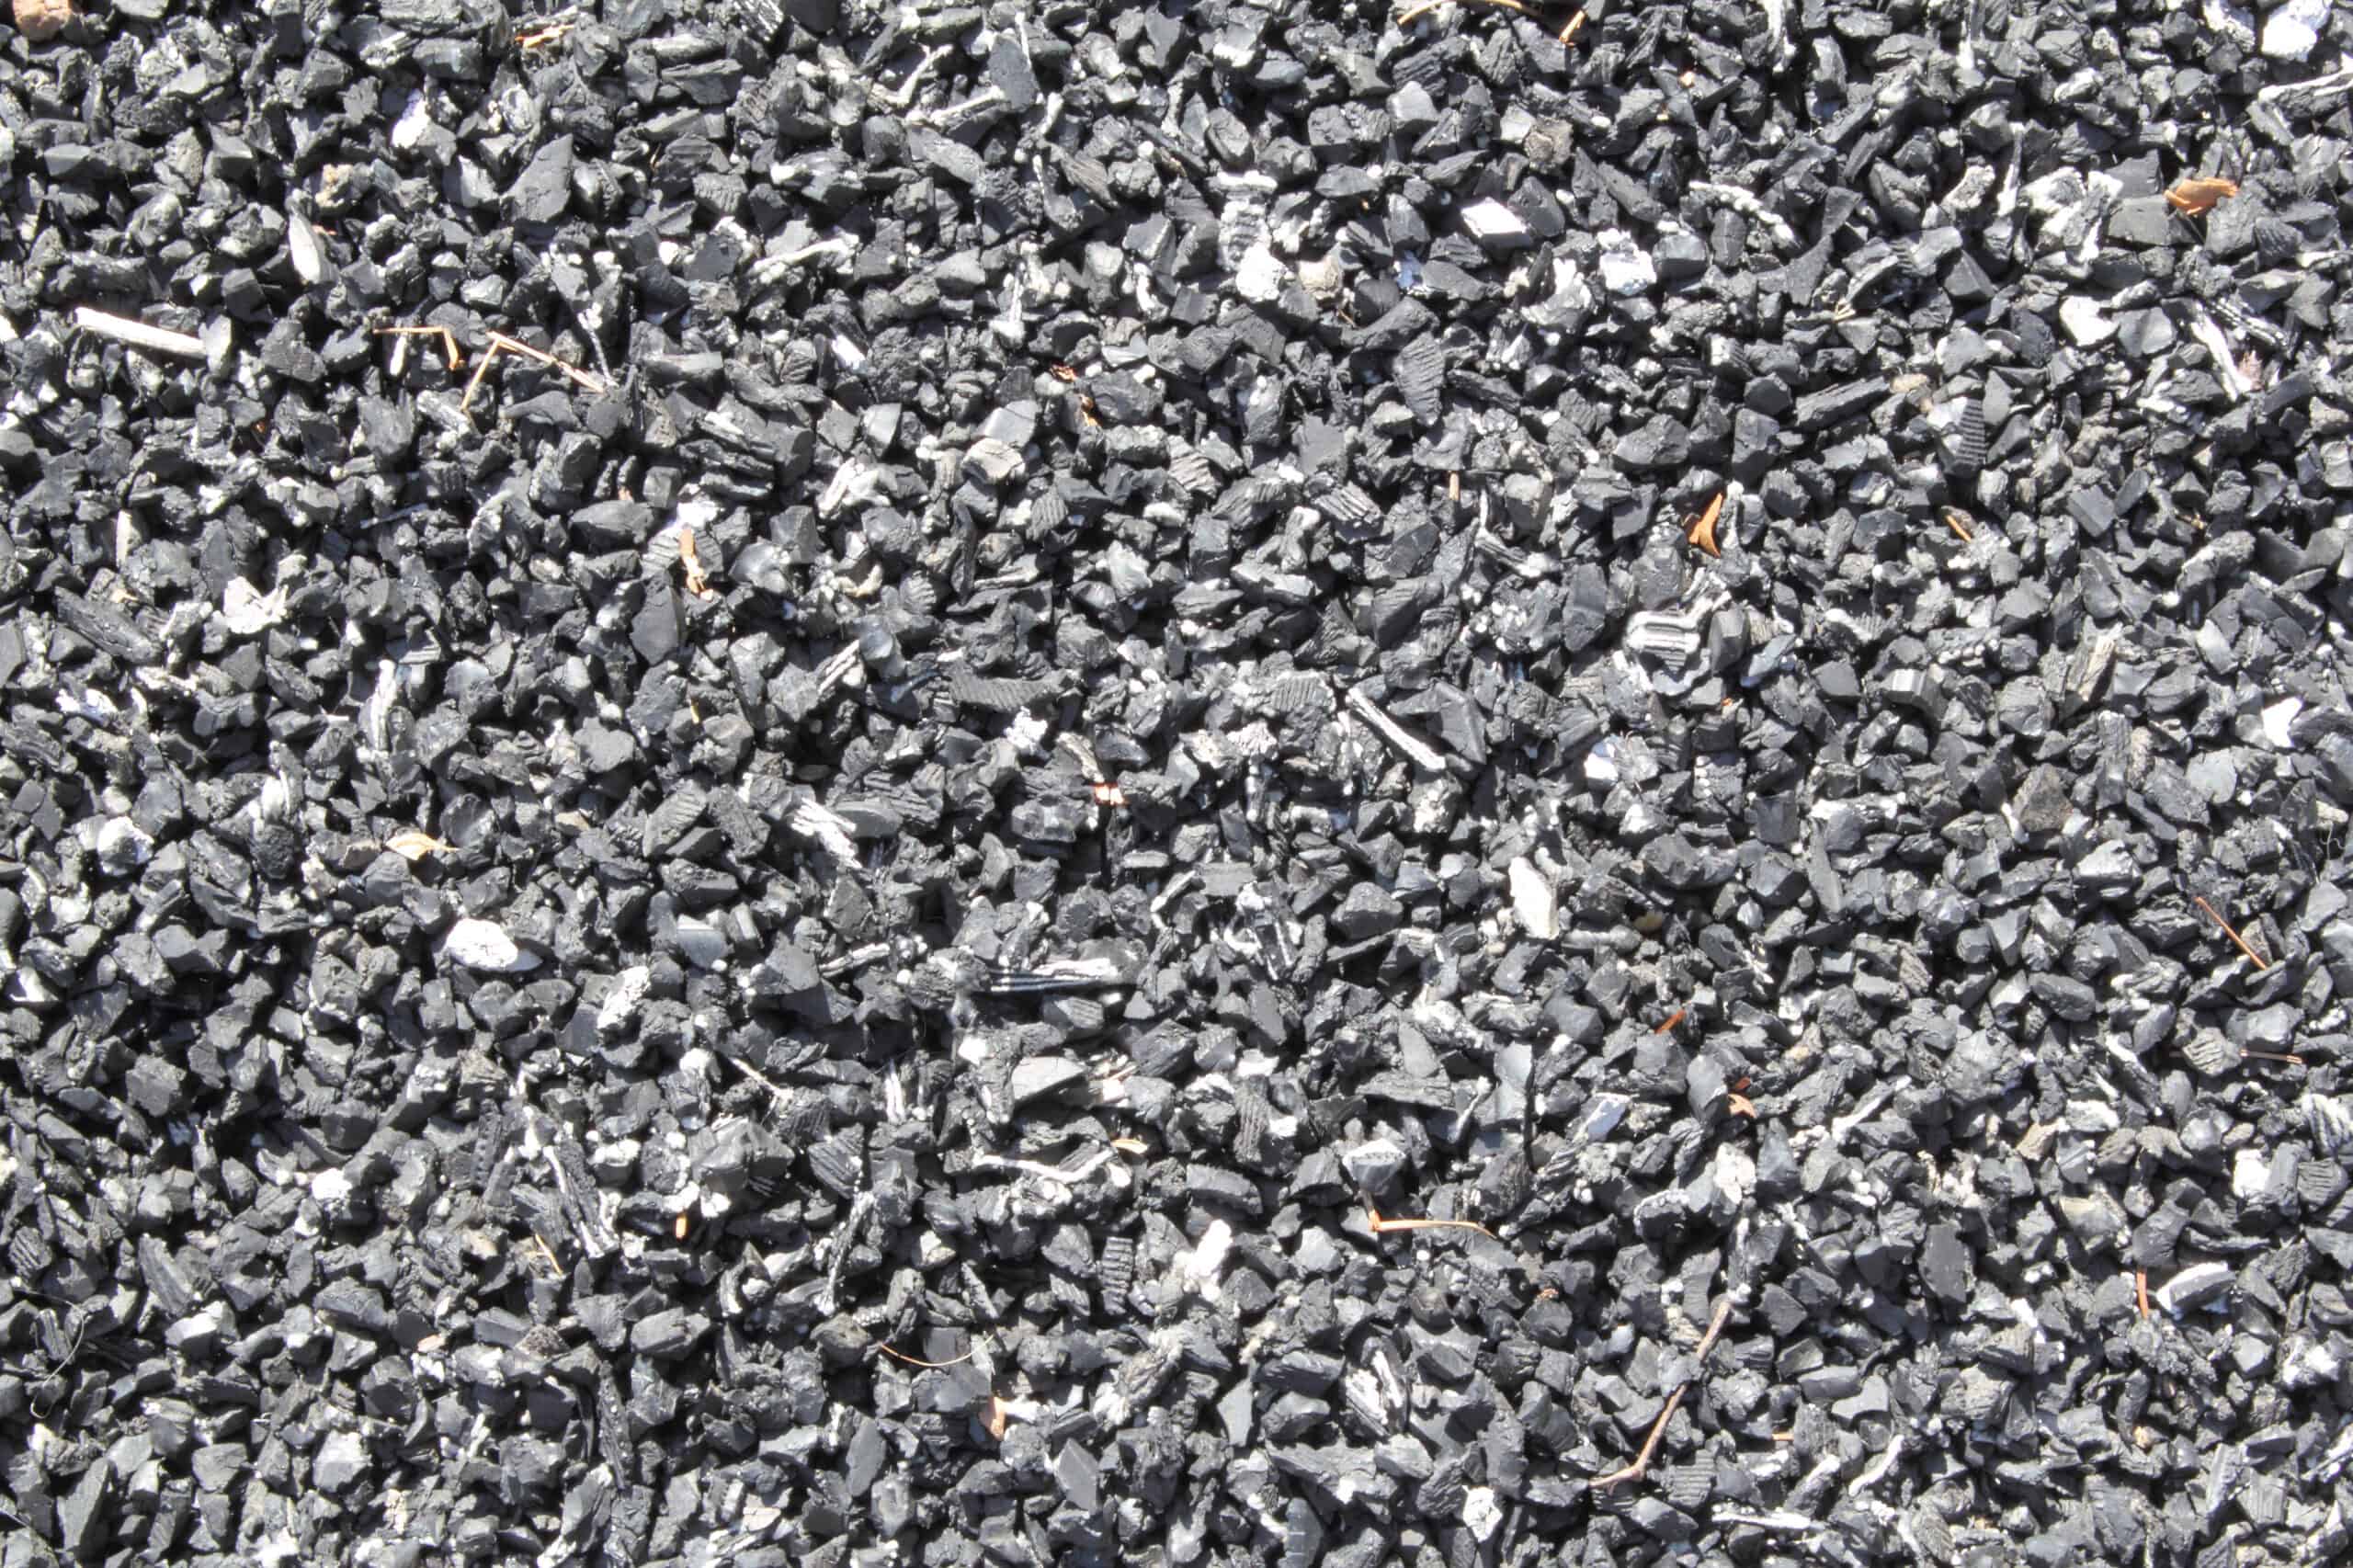 Is Shredded Rubber Tire Mulch Safe? (Confirmed)